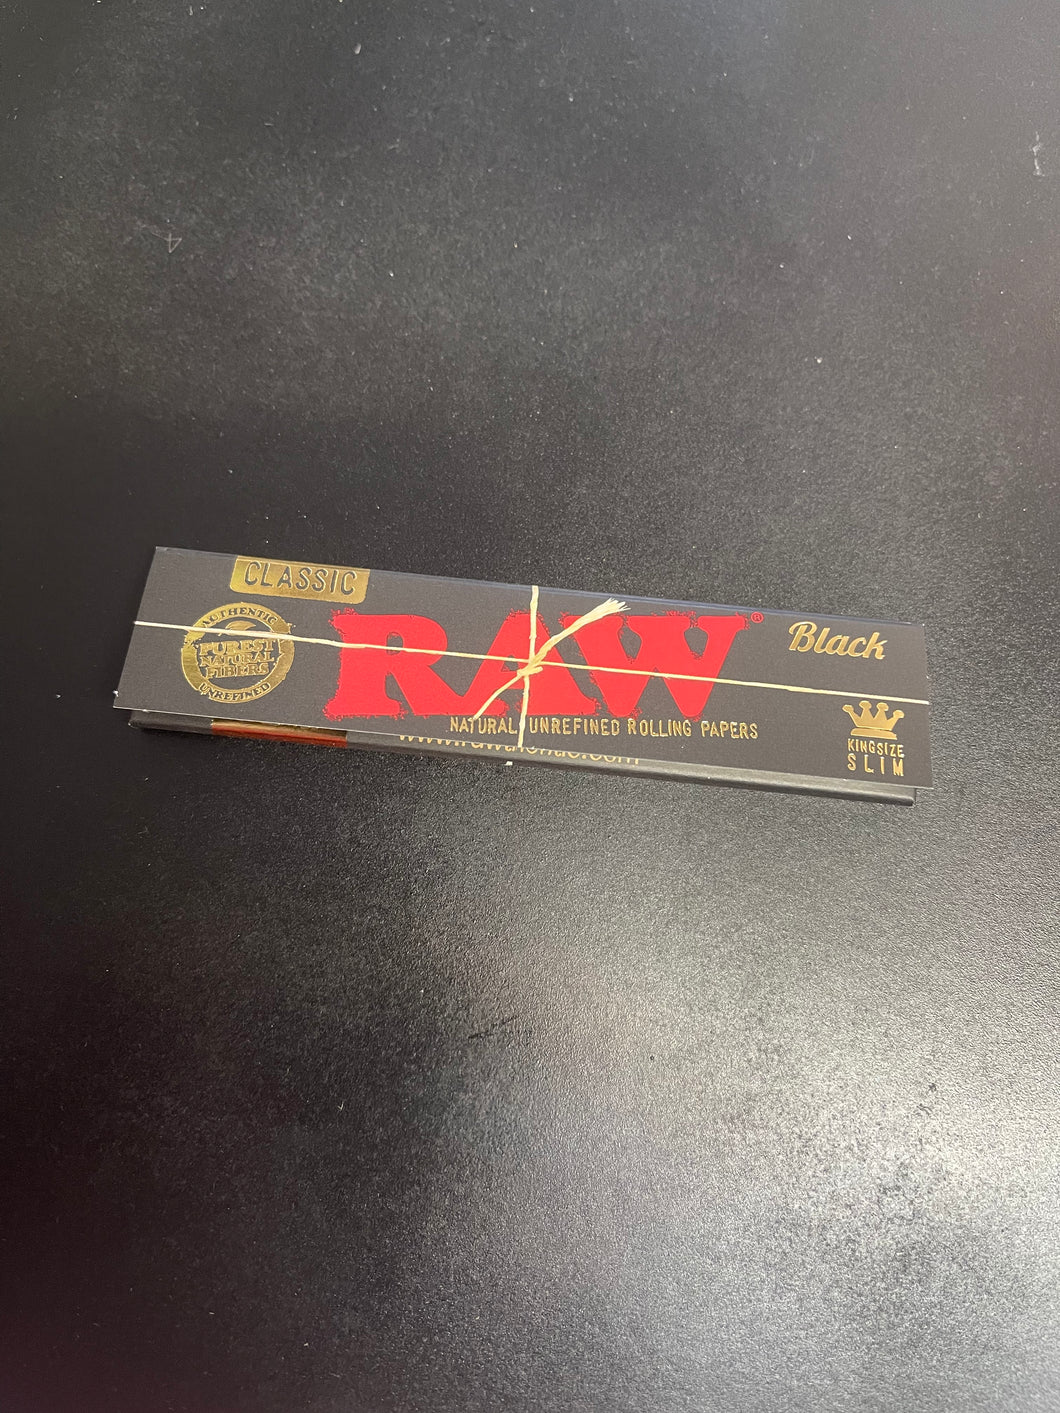 RAW Black King size papers